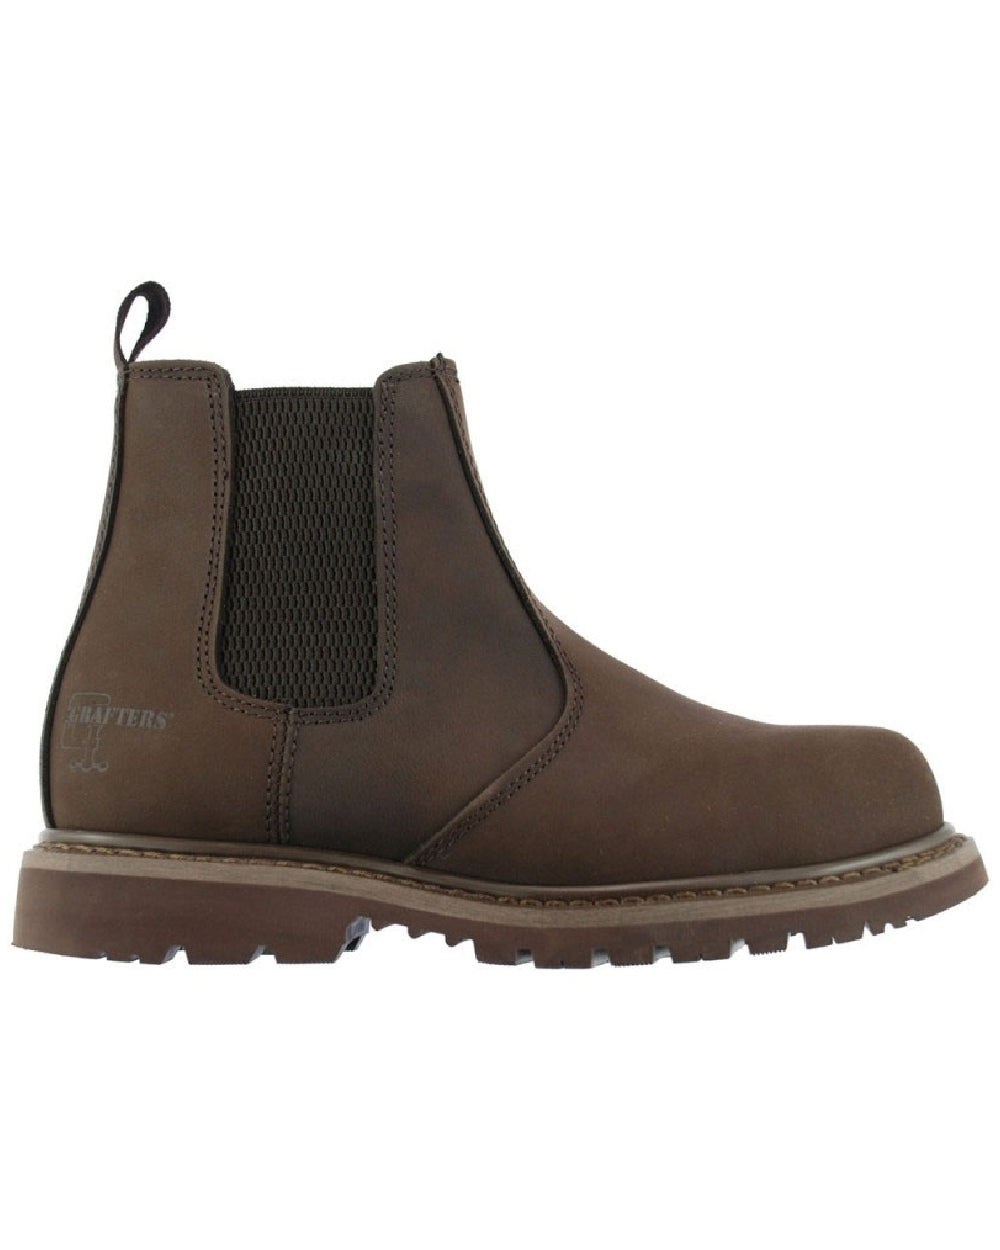 Brown coloured Grafters Chelsea Safety Boot on white background